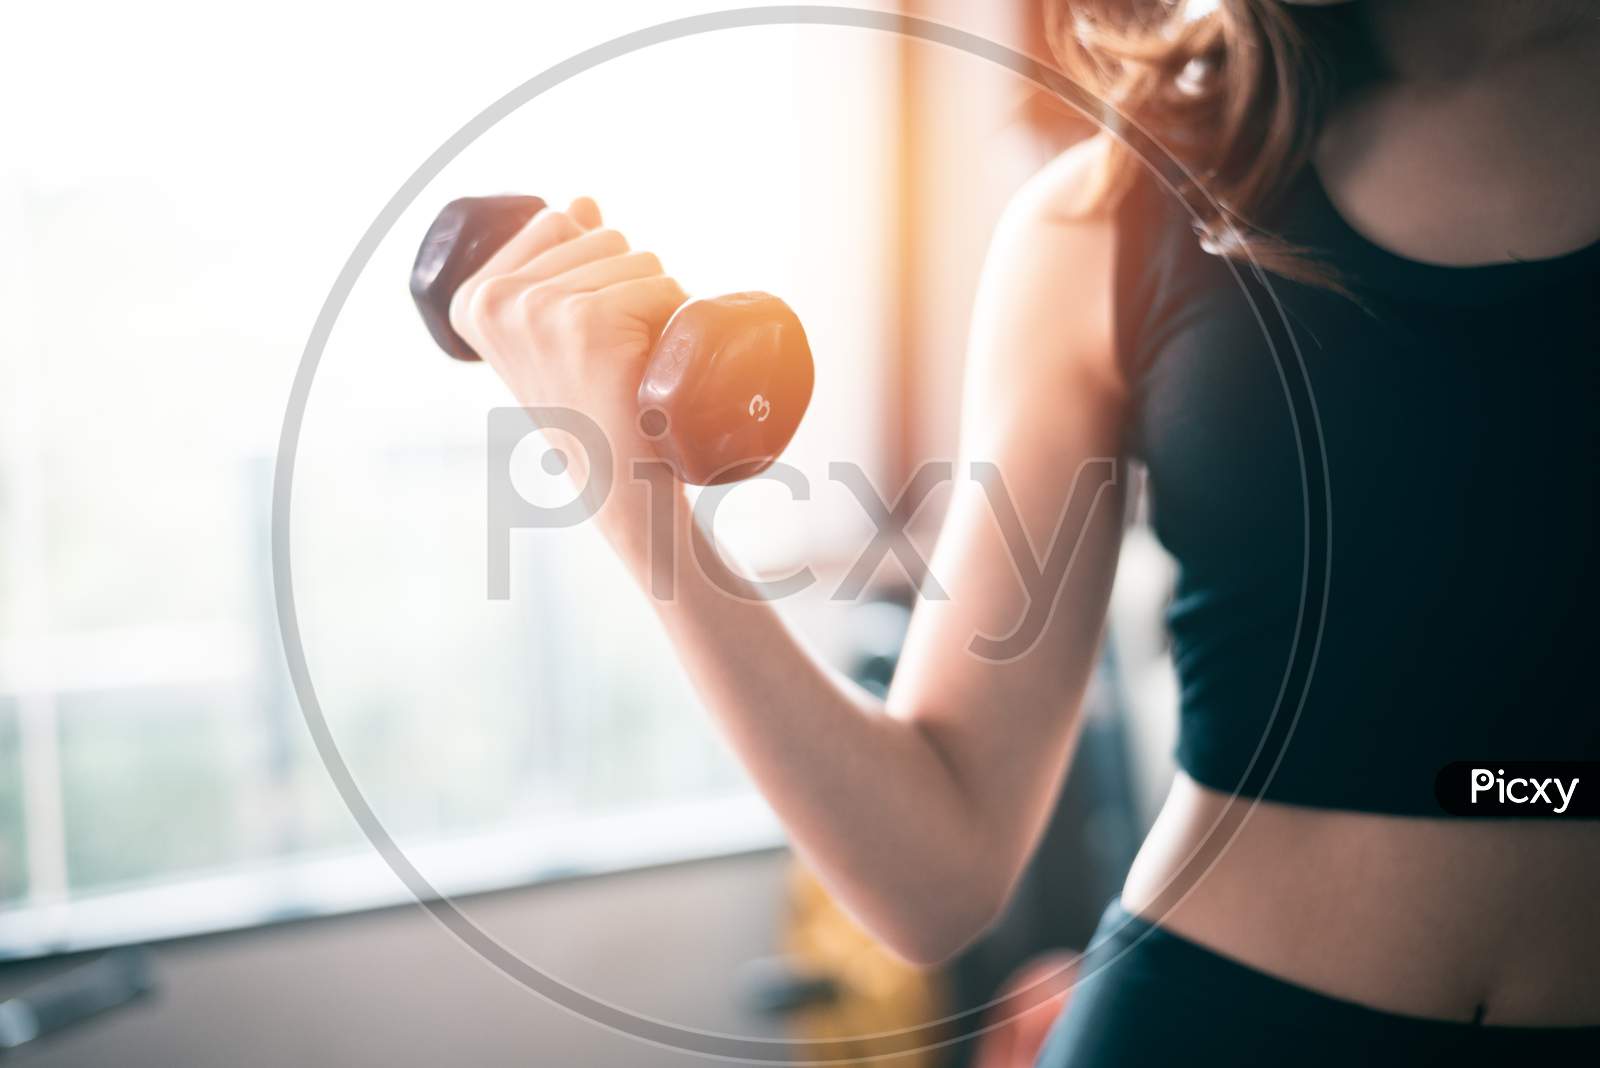 Hand Of Sports Woman Lifting Dumbbell For Weight Training Near Window By Right Hand For Pumping Biceps Muscle. Workout And Body Build Up Concept. Indoor Exercise Gym And Sports Club Theme.